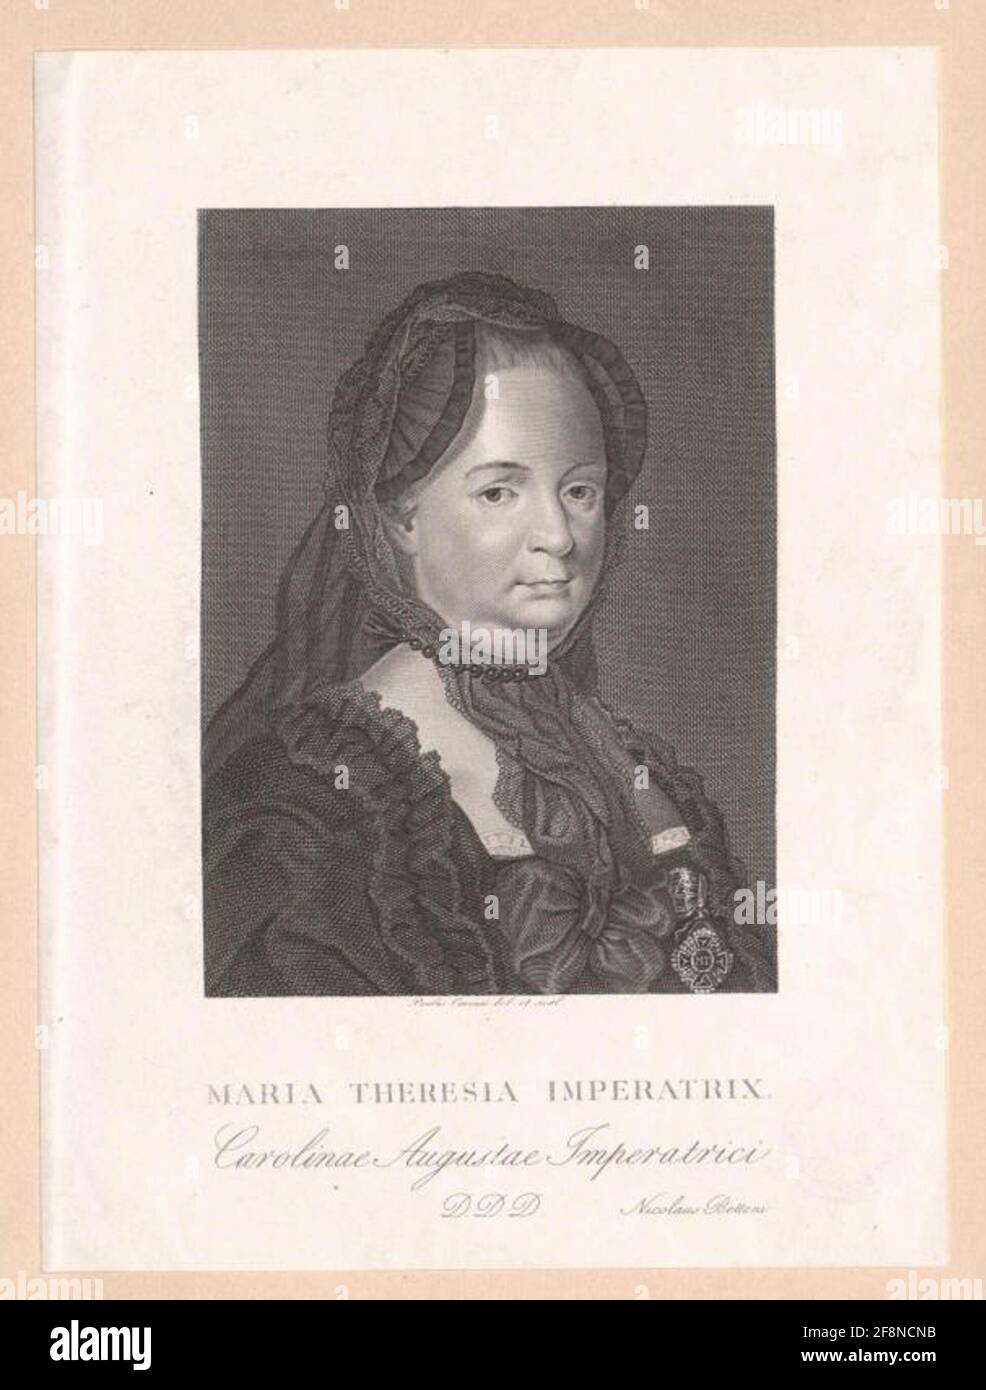 Maria Theresia, Roman-German Empress Maria Theresia in Witwentracht.Chopper engraving by Paolo Carni after paintings by Joseph DuCruux in the painting gallery of the Academy of Fine Arts in Vienna (1769). Illustration for the 1822 published work 'Vite E Ritratti di Venticinque Uomini Illustri' From Niccolò Bettoni. Stock Photo